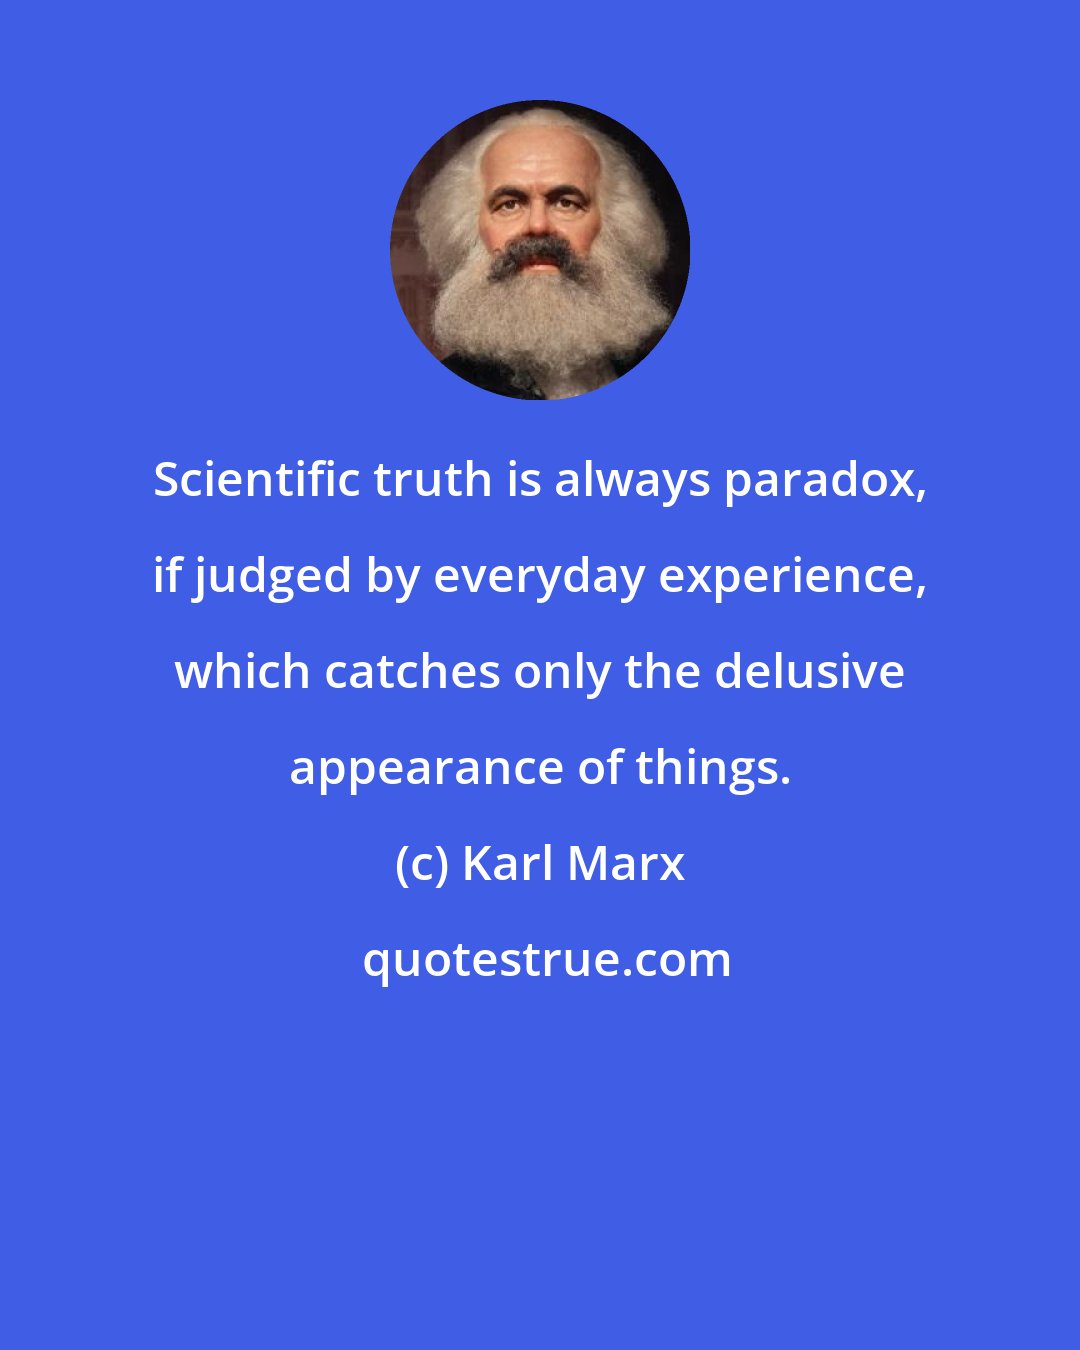 Karl Marx: Scientific truth is always paradox, if judged by everyday experience, which catches only the delusive appearance of things.